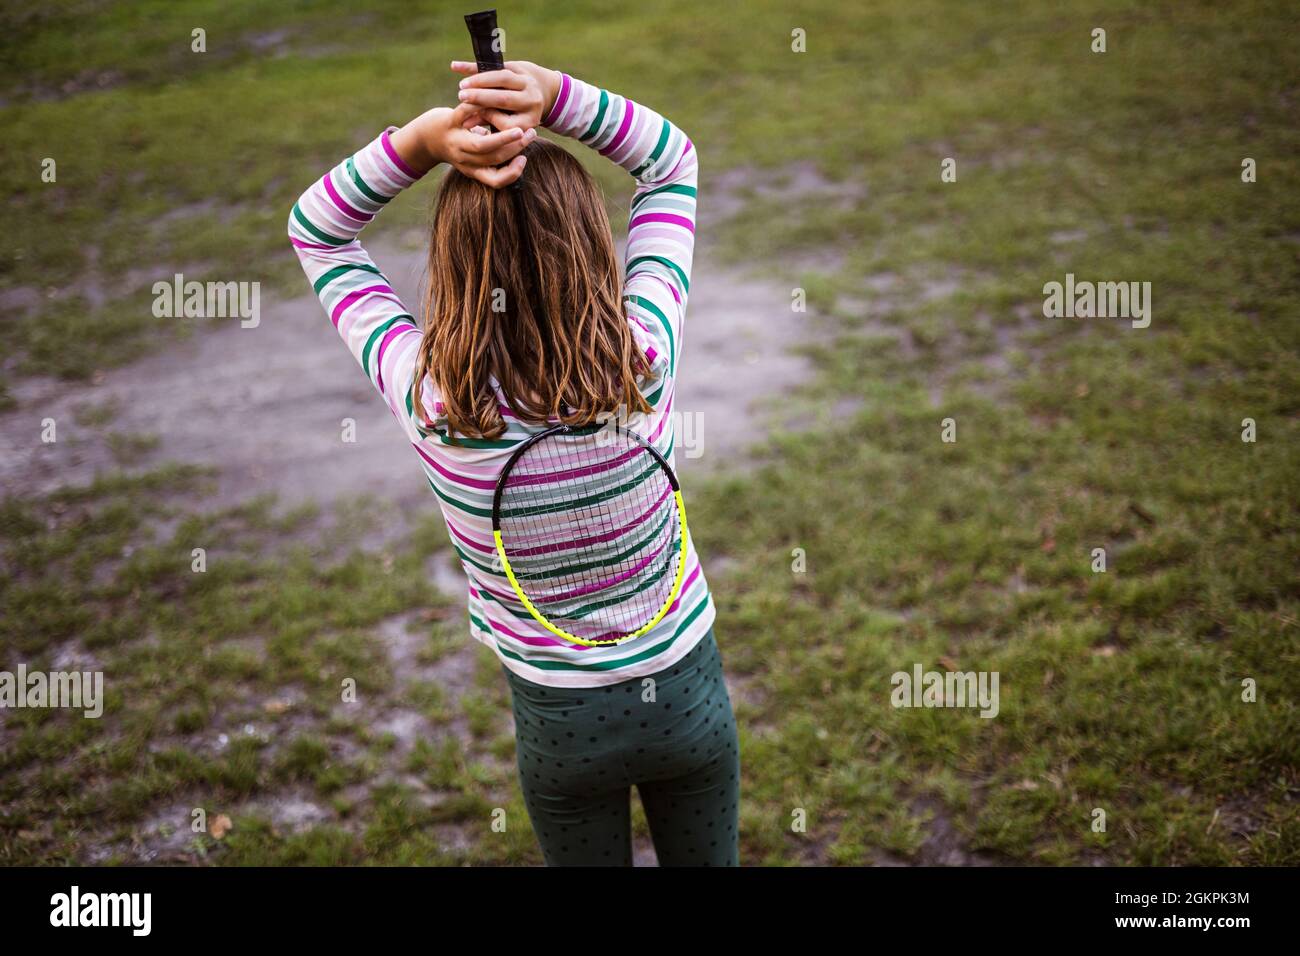 Girl with badminton racket, rear view Stock Photo